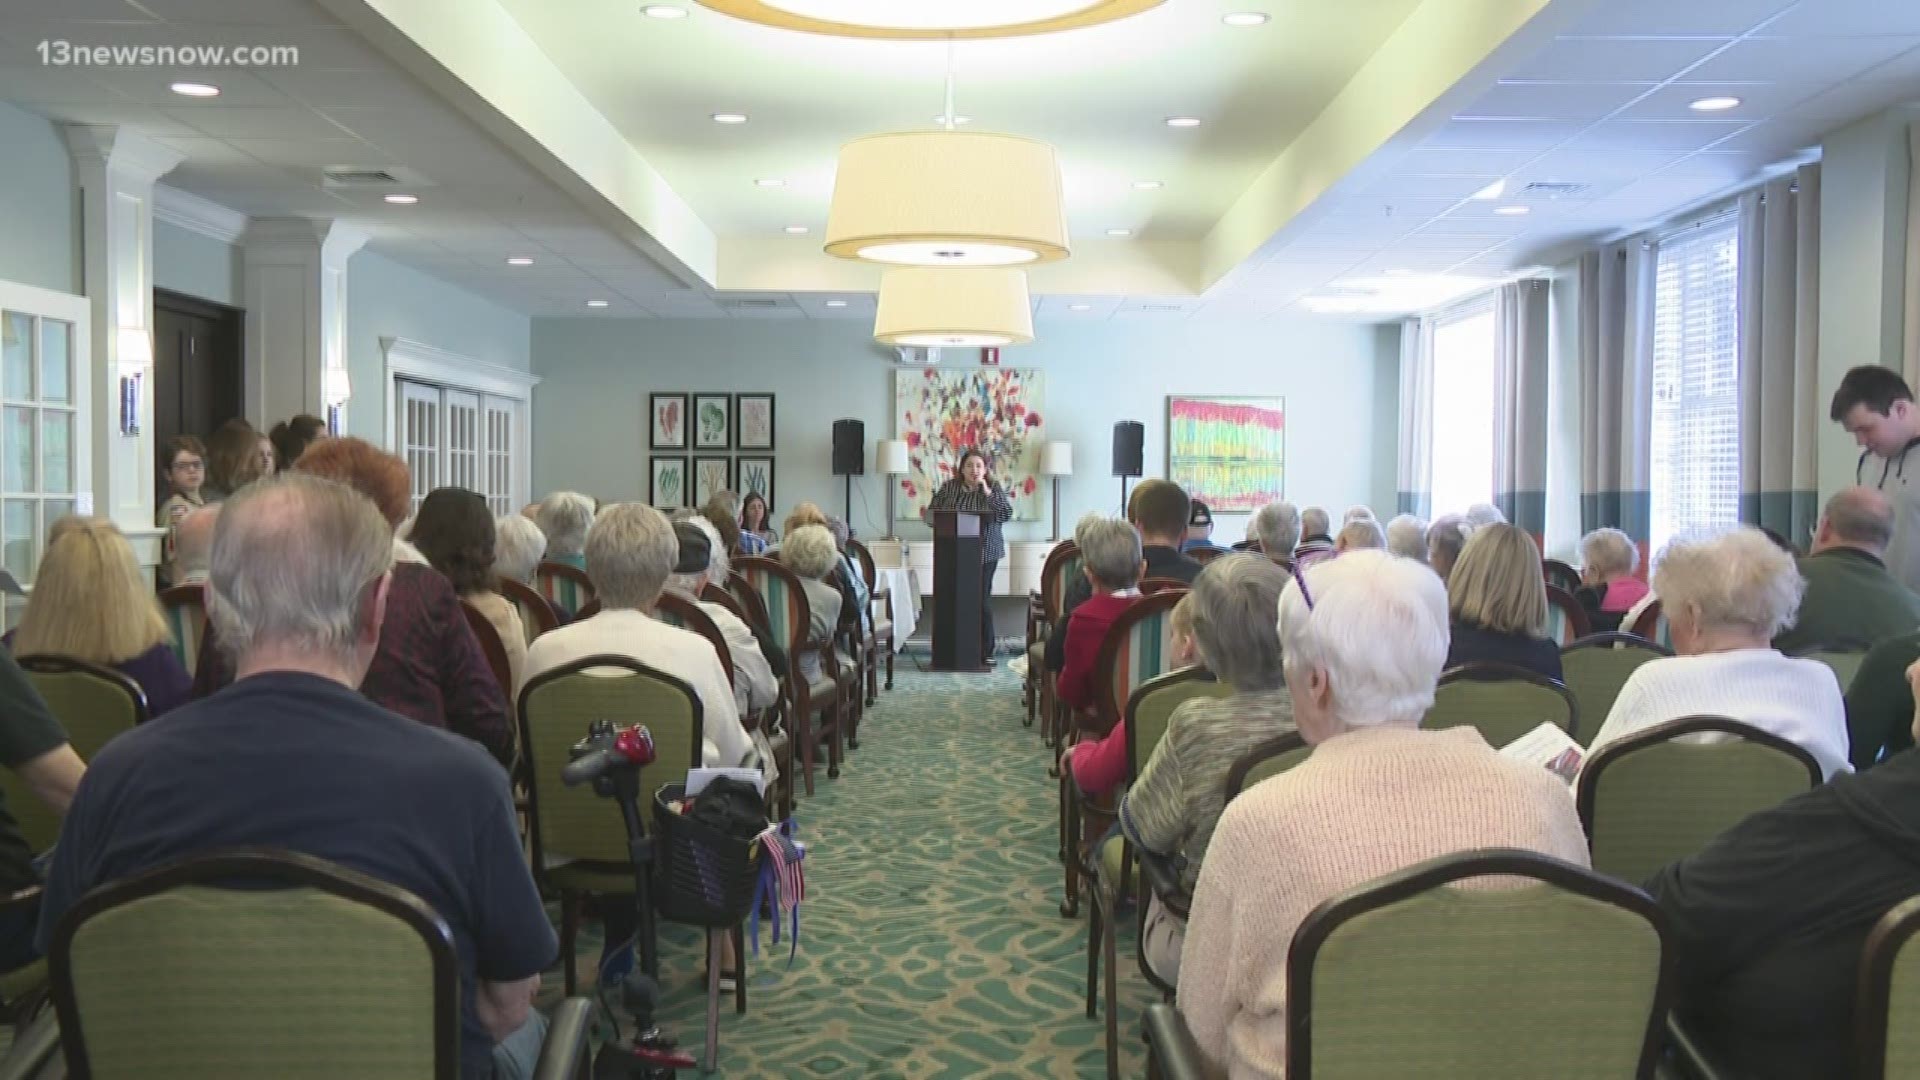 The senior living community First Colonial Inn is home to more than 130 veterans and their spouses, making Veterans Day an important holiday for its residents.